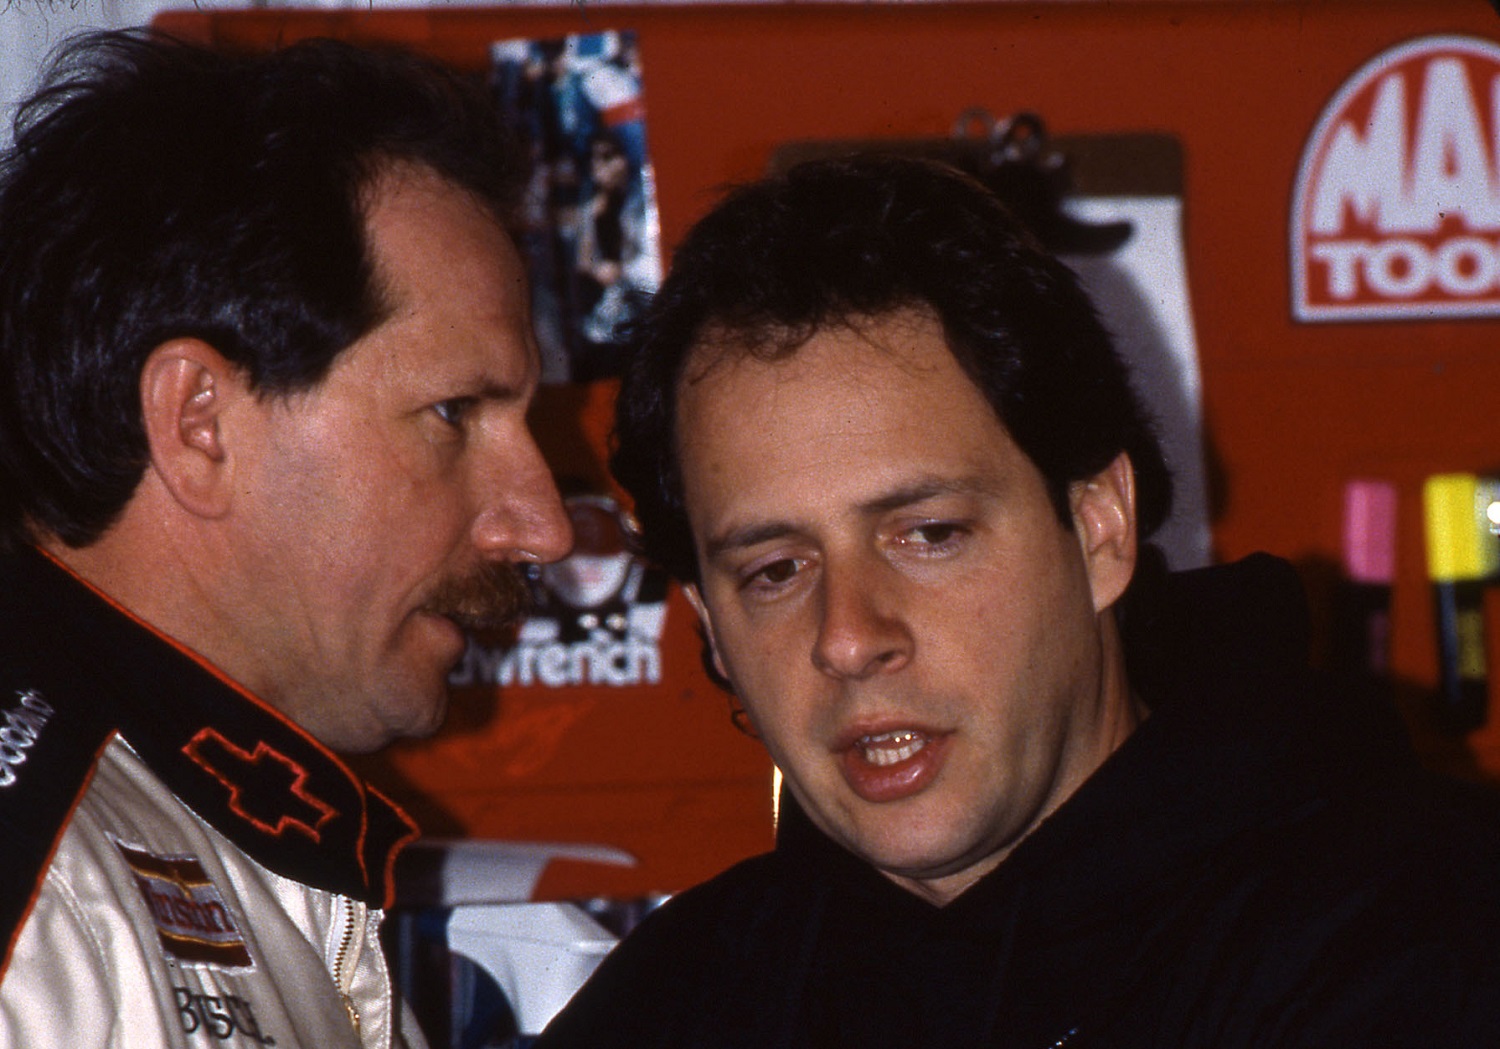 Kirk Shelmerdine was crew chief for Richard Childress Racing and driver Dale Earnhardt from 1982 through 1992, scoring 46 NASCAR Cup victories, along with winning four Cup championships. | ISC Images & Archives via Getty Images